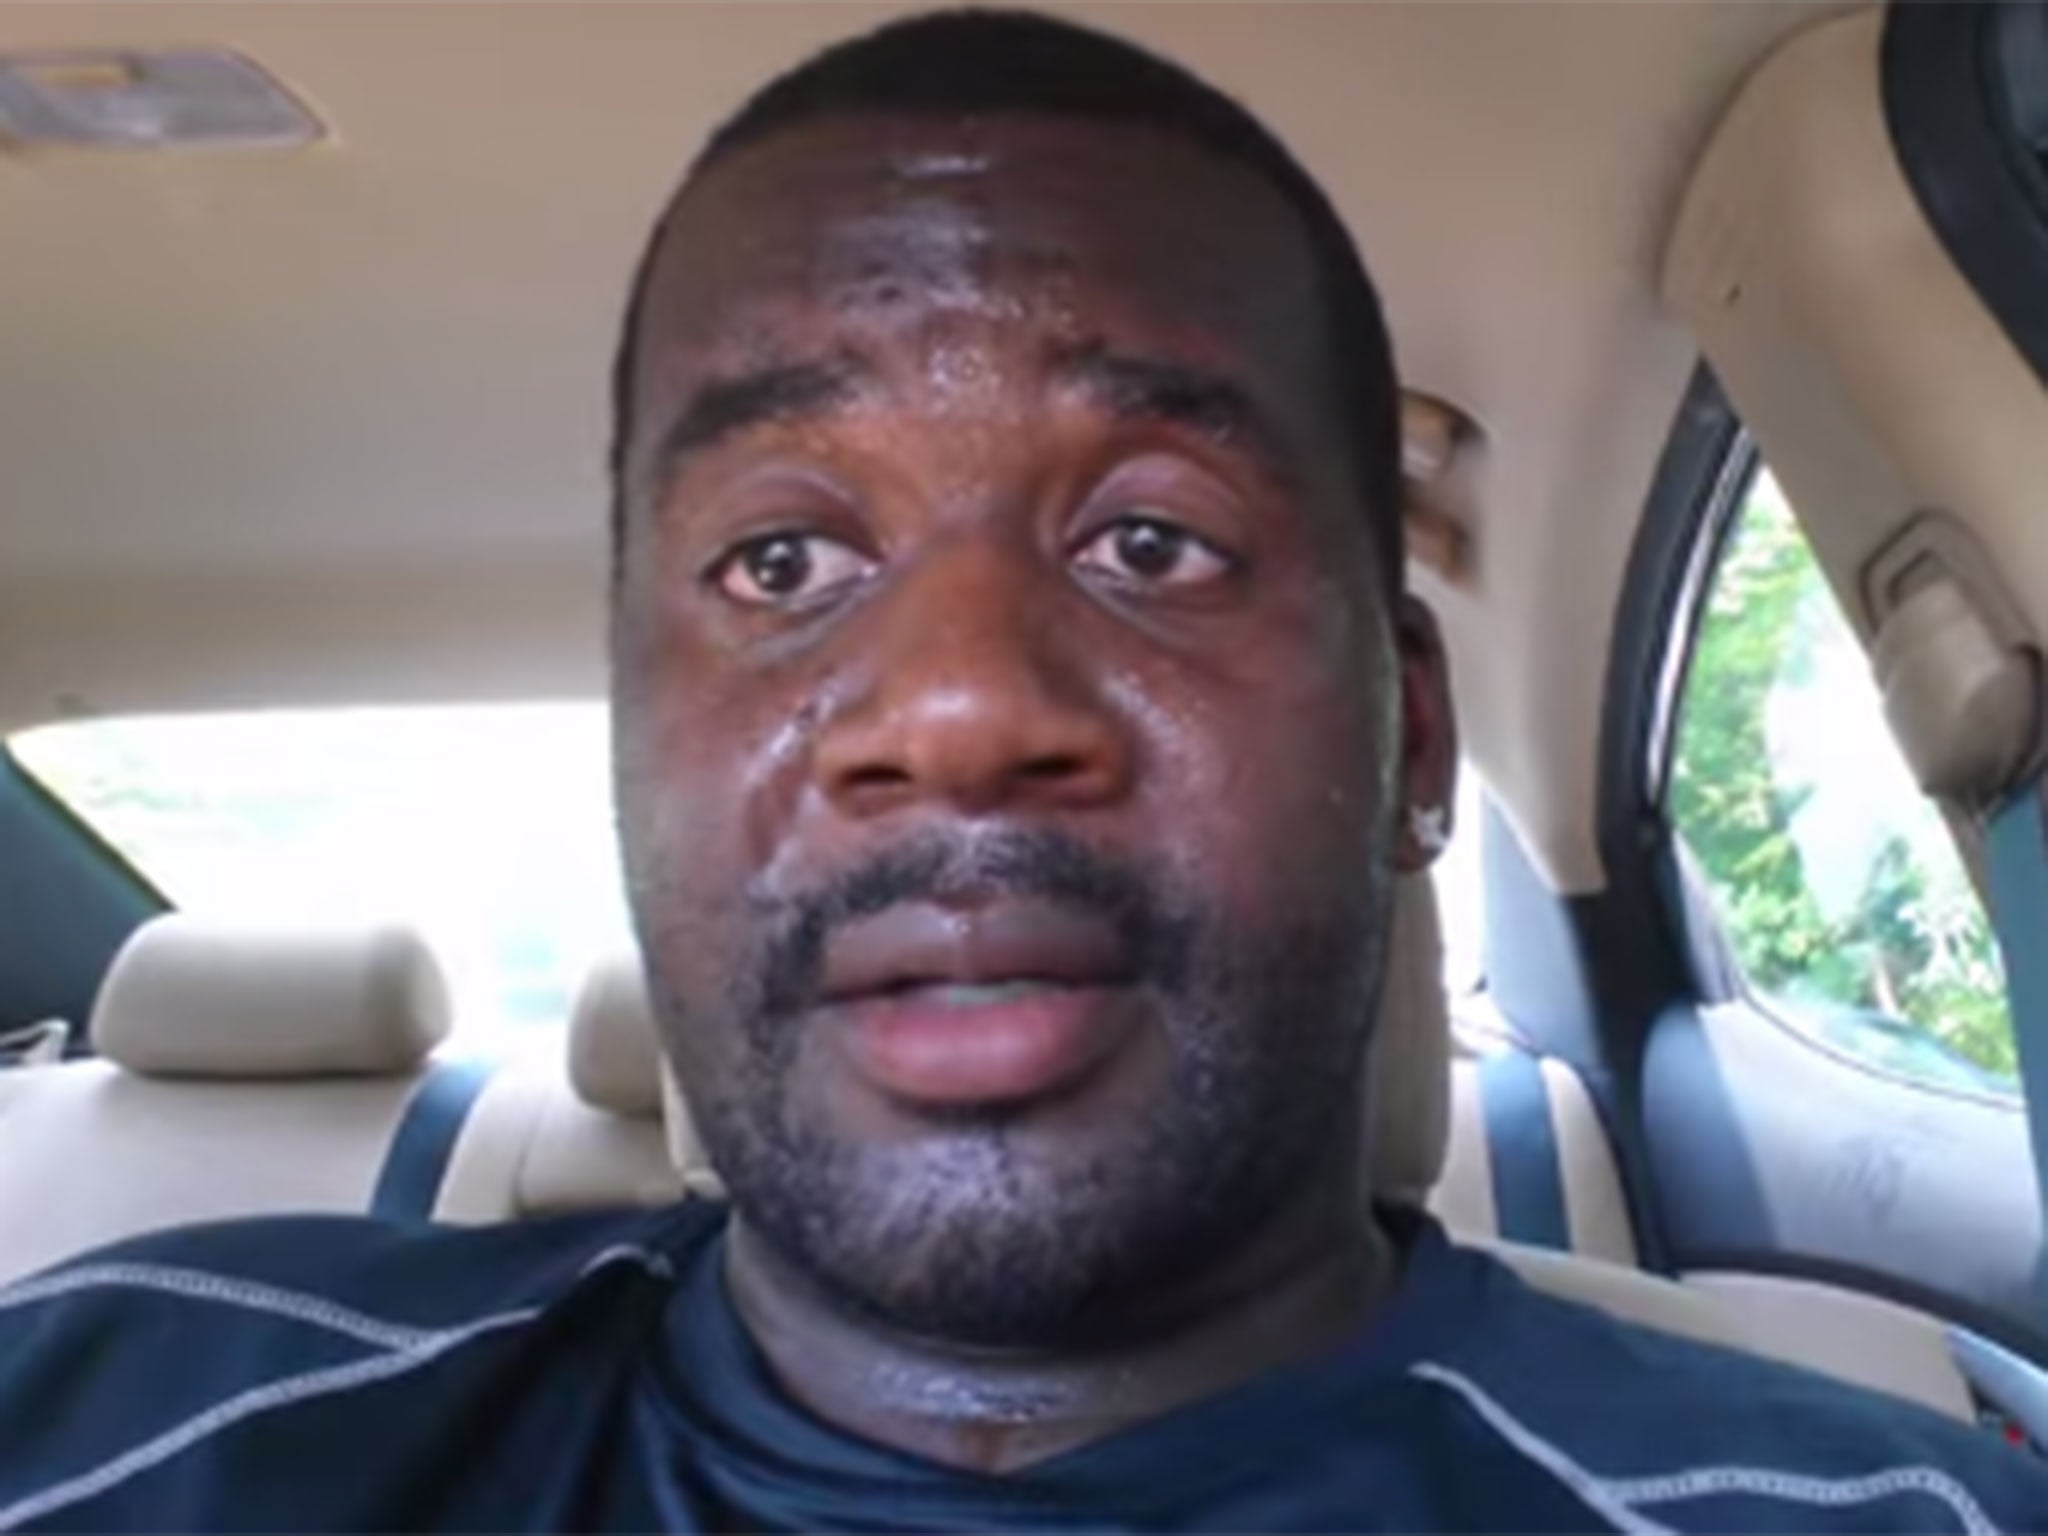 Terry Williams can be seen dripping with sweat in the video